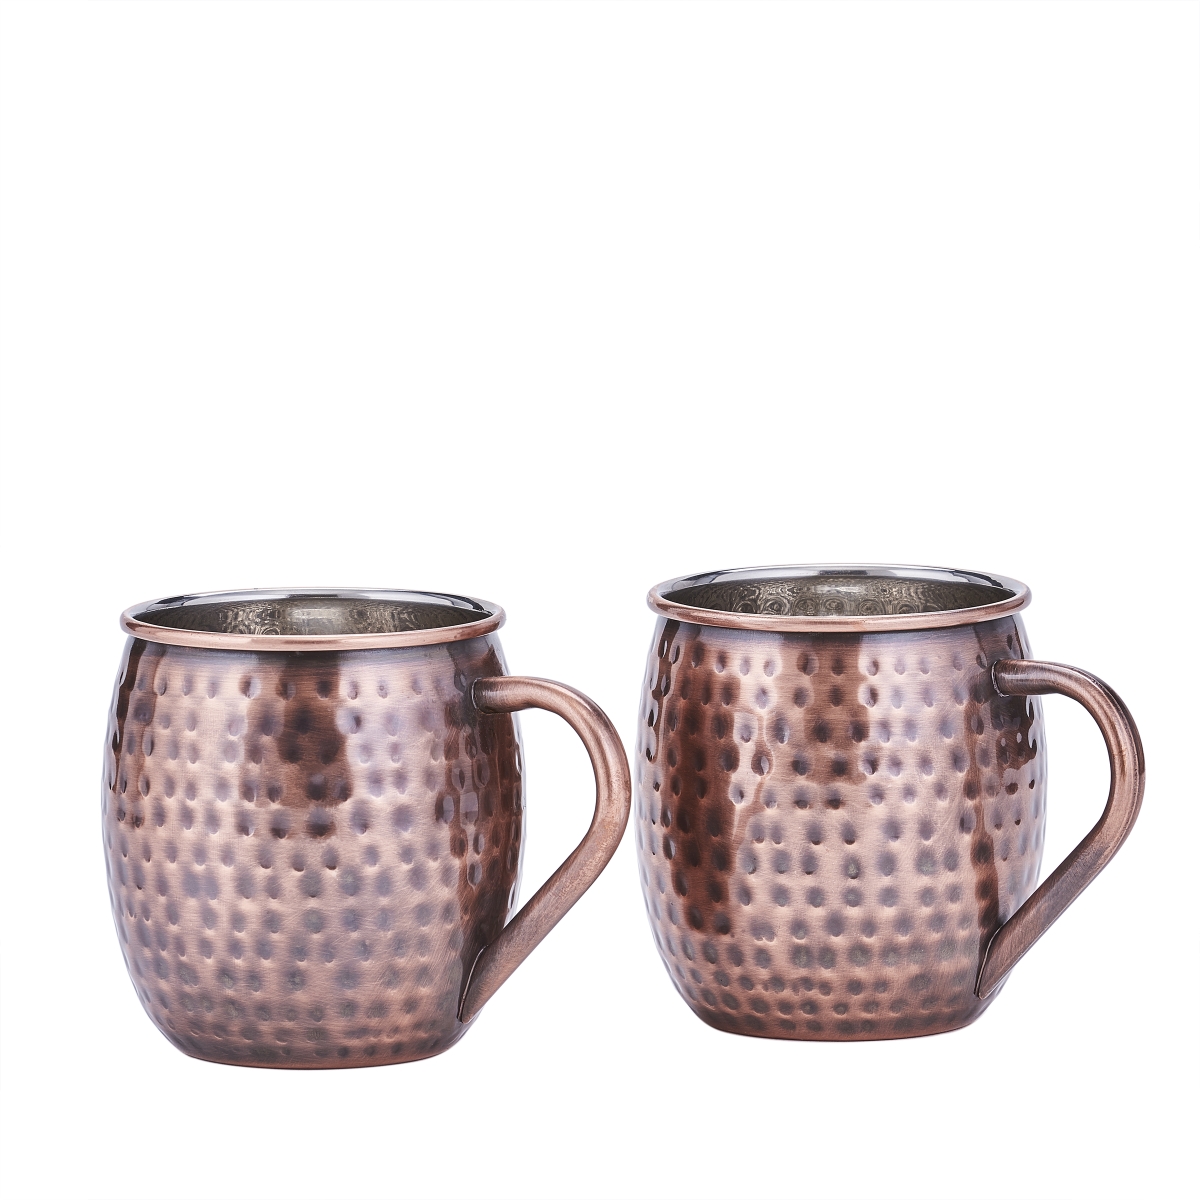 2437h 4 In. 16 Oz Hammered Moscow Mule Mugs, Antique Copper - Set Of 2